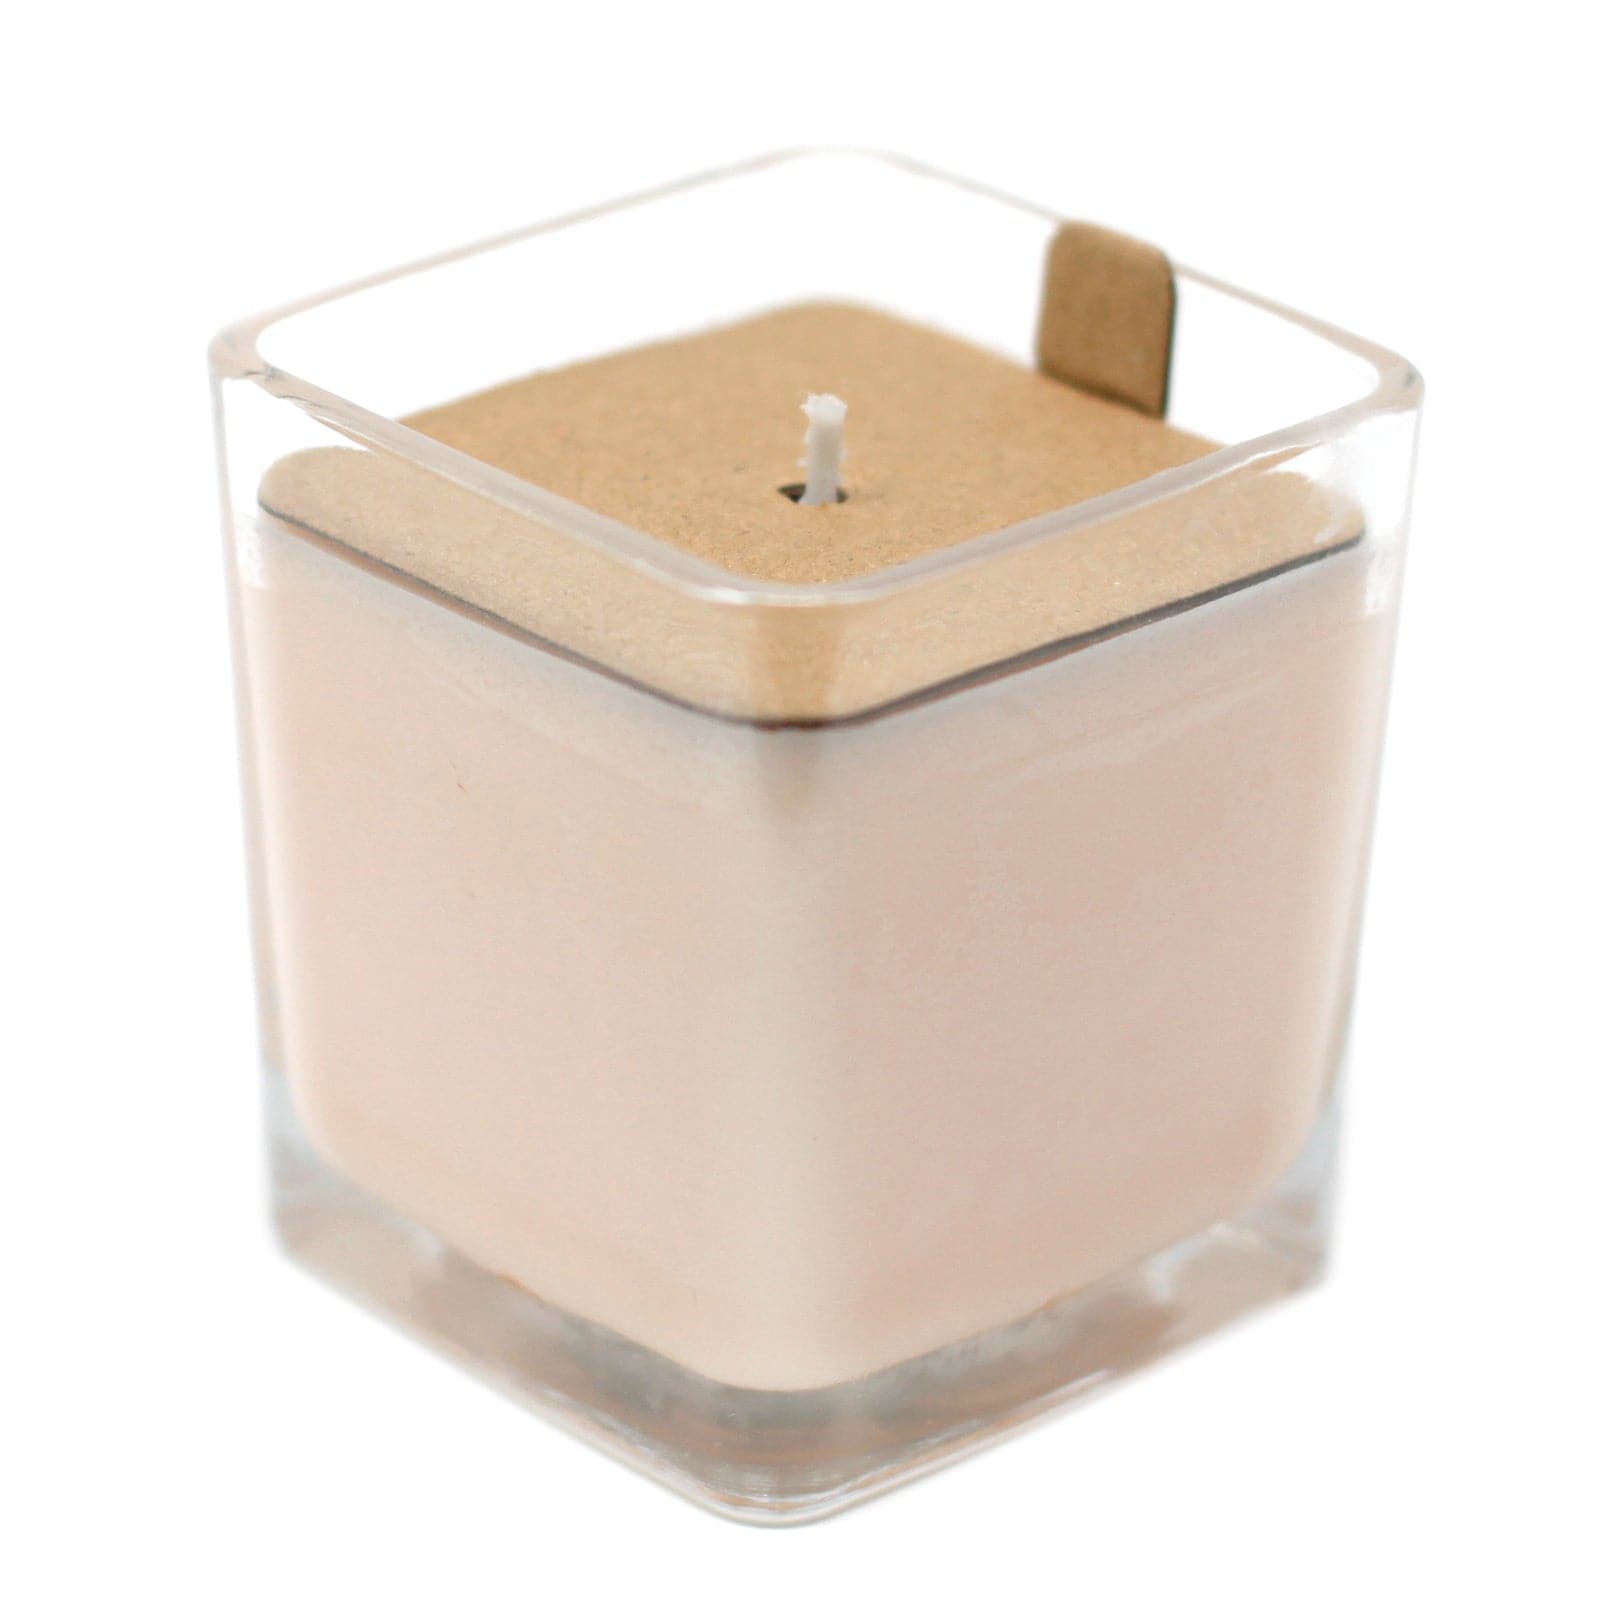 White Label Soy Wax Jar Candle - Peach Smoothie - best price from Maltashopper.com WLSOYC-12